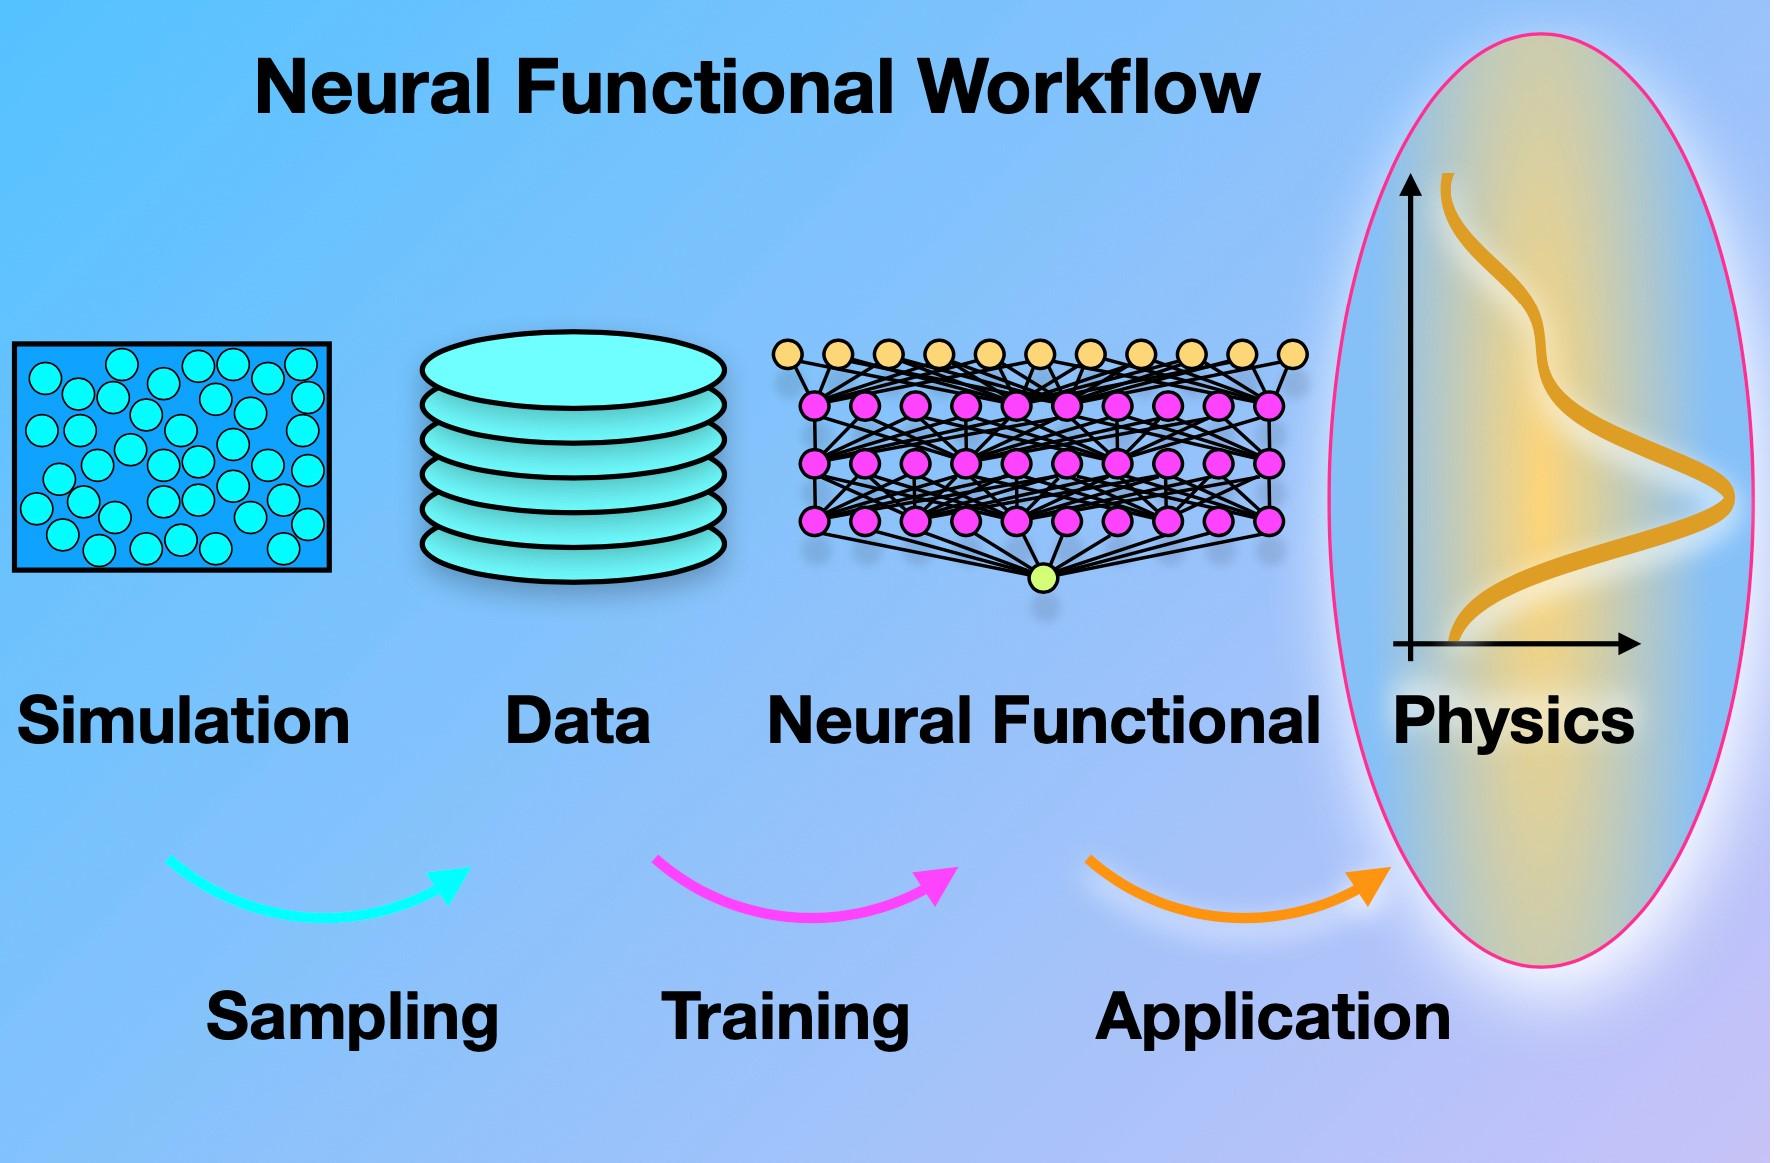 workflow of the neural functional theory